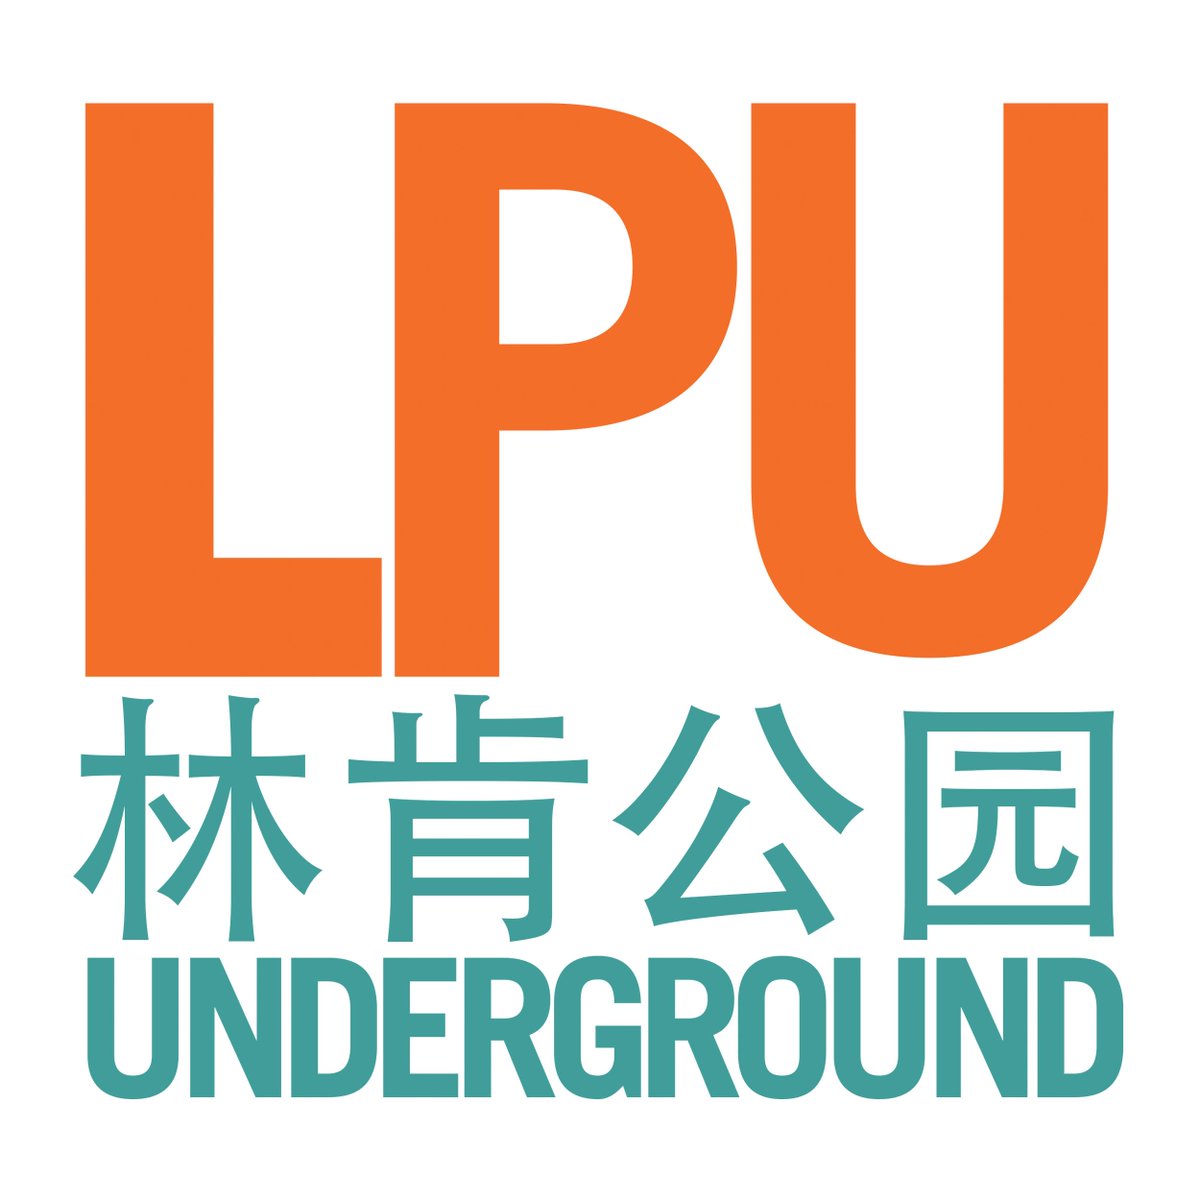 Announcing LPU events in Shenzhen and Chongquing.  Click here for more details: http://t.co/7iwyZYE20a http://t.co/IBM1MOAP3k